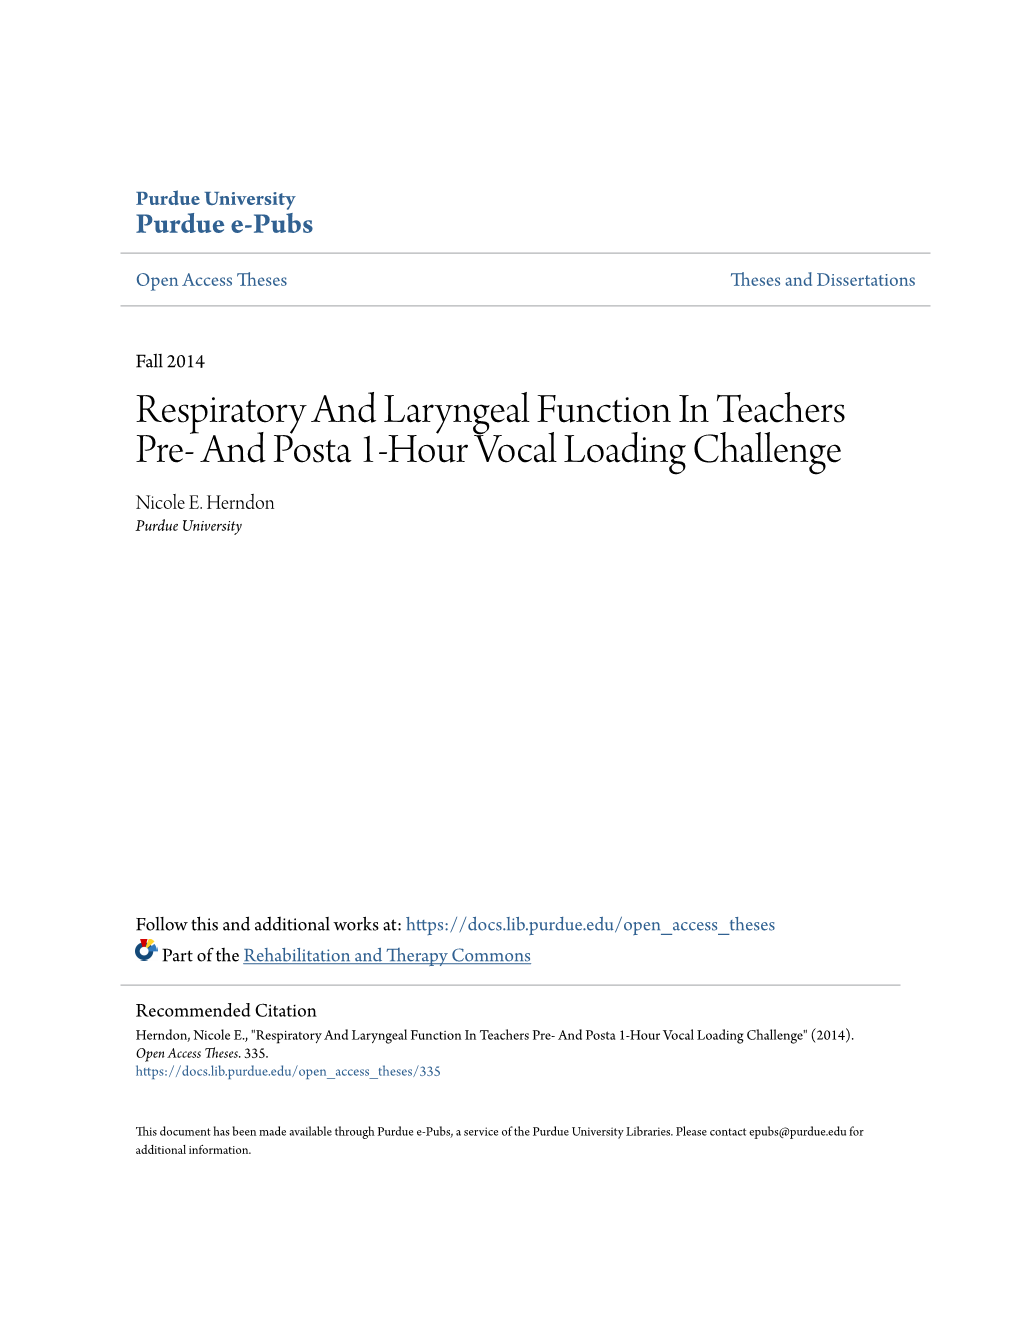 Respiratory and Laryngeal Function in Teachers Pre- and Posta 1-Hour Vocal Loading Challenge Nicole E